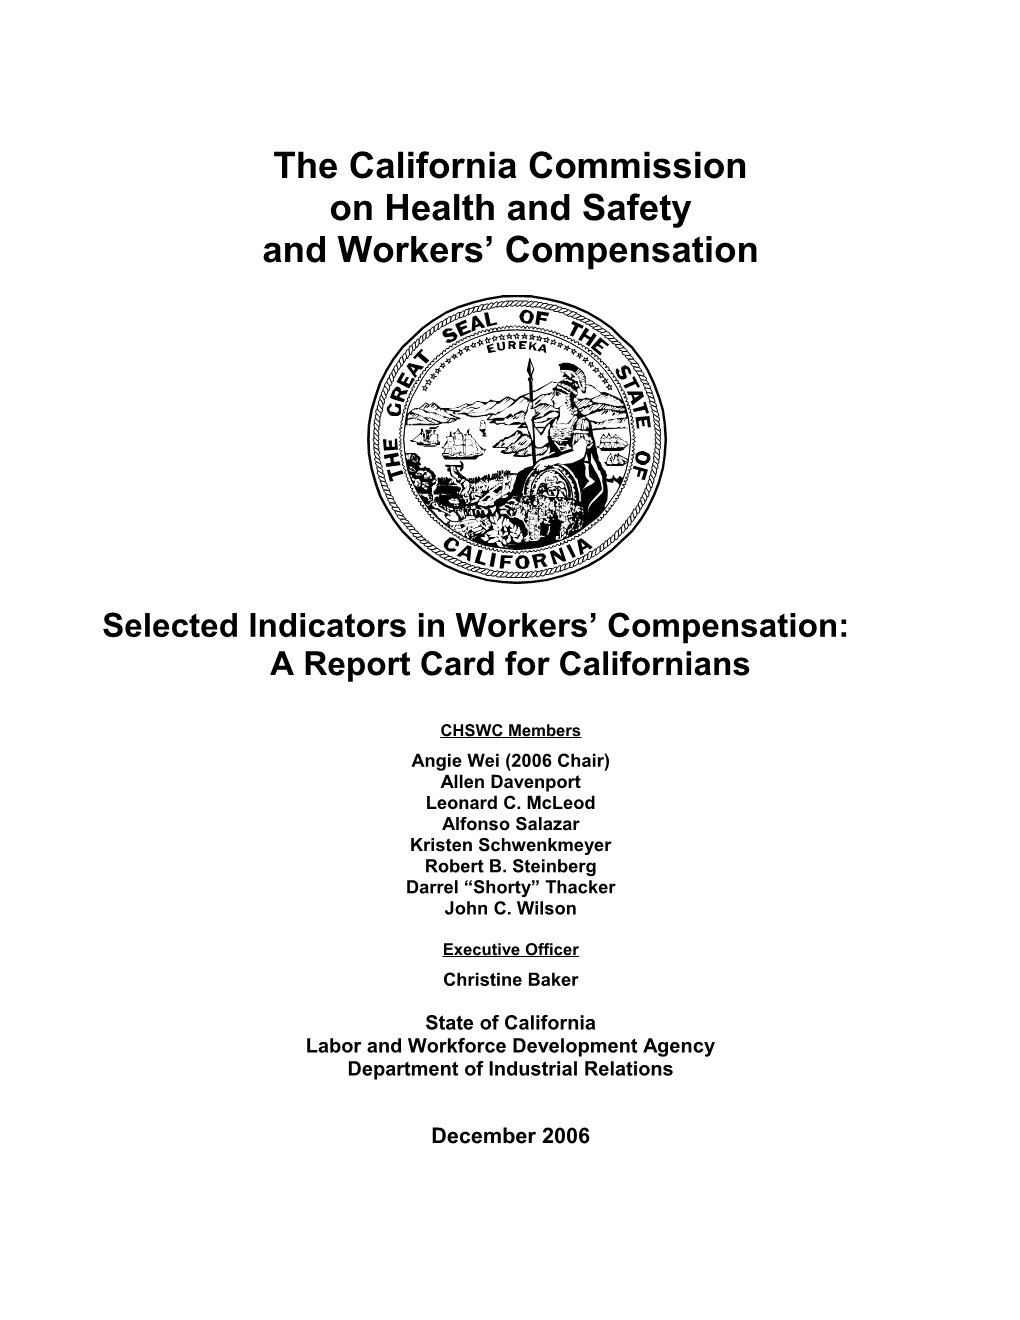 Selected Indicators in Workers Compensation: a Report Card for Californians